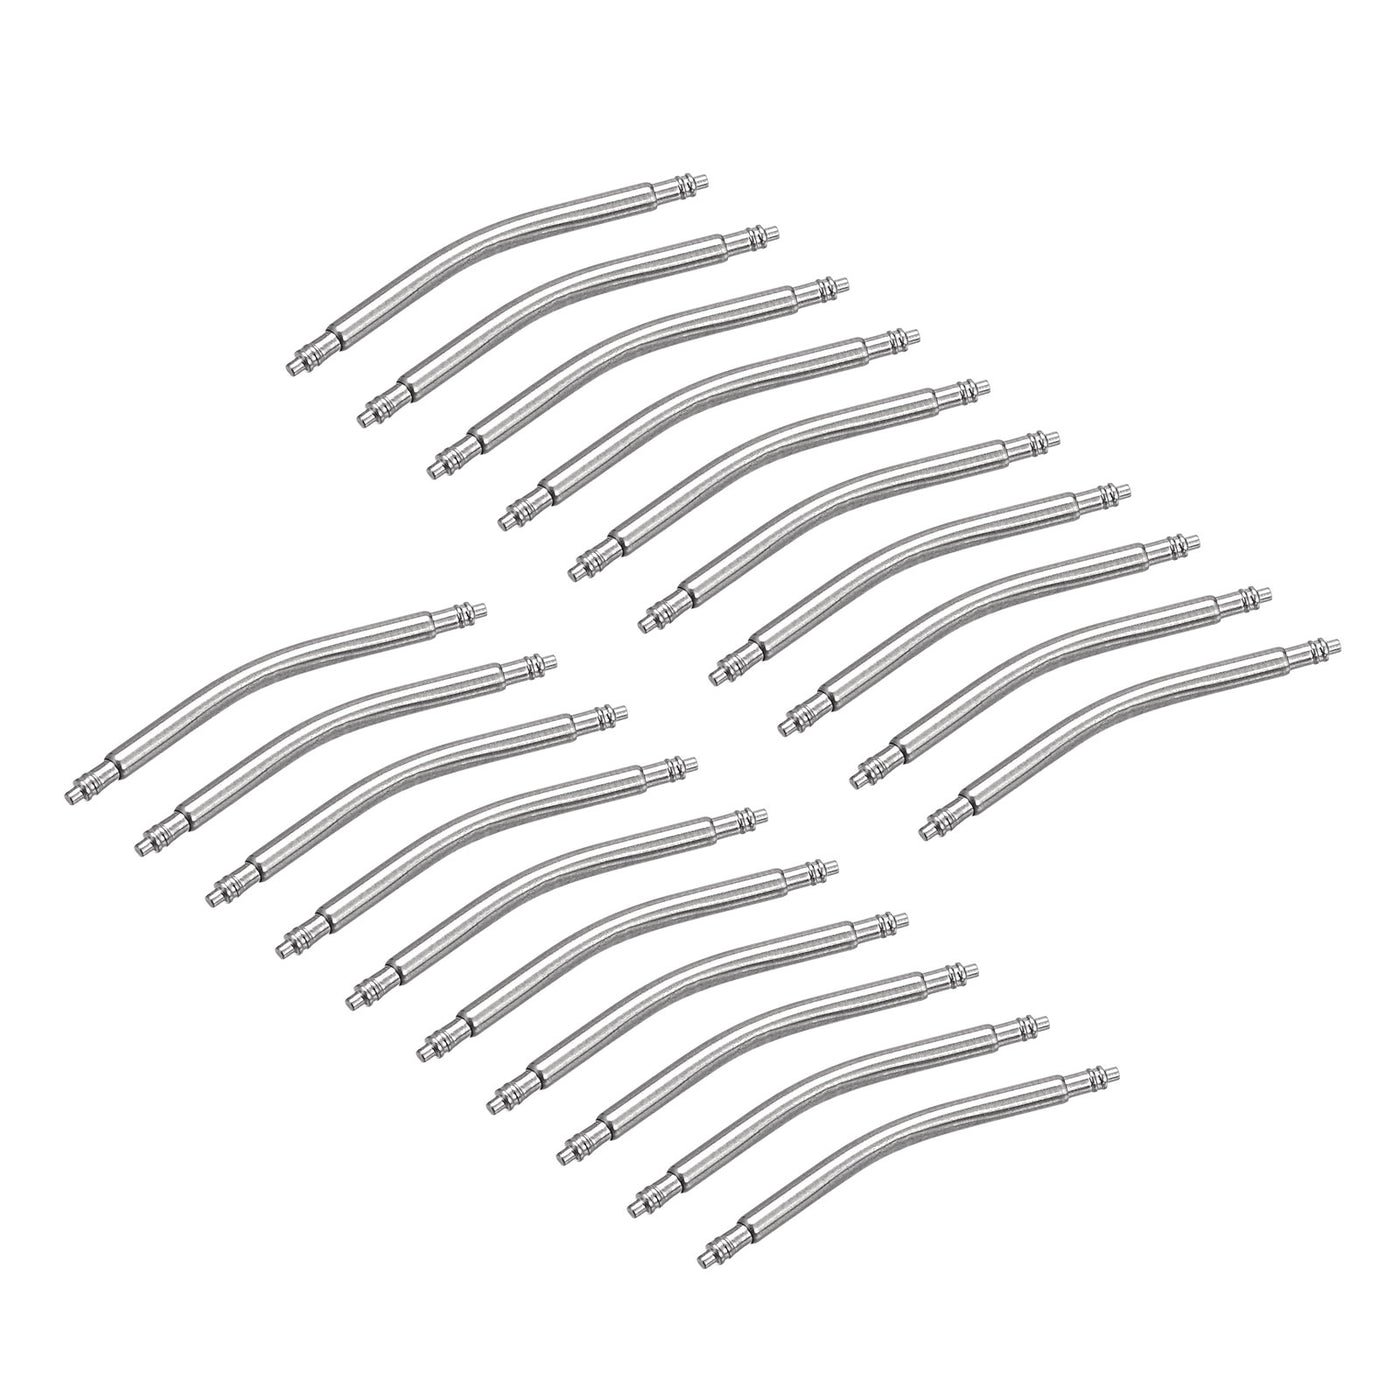 uxcell Uxcell Curved Spring Bar Pins Watch Band Link Pin